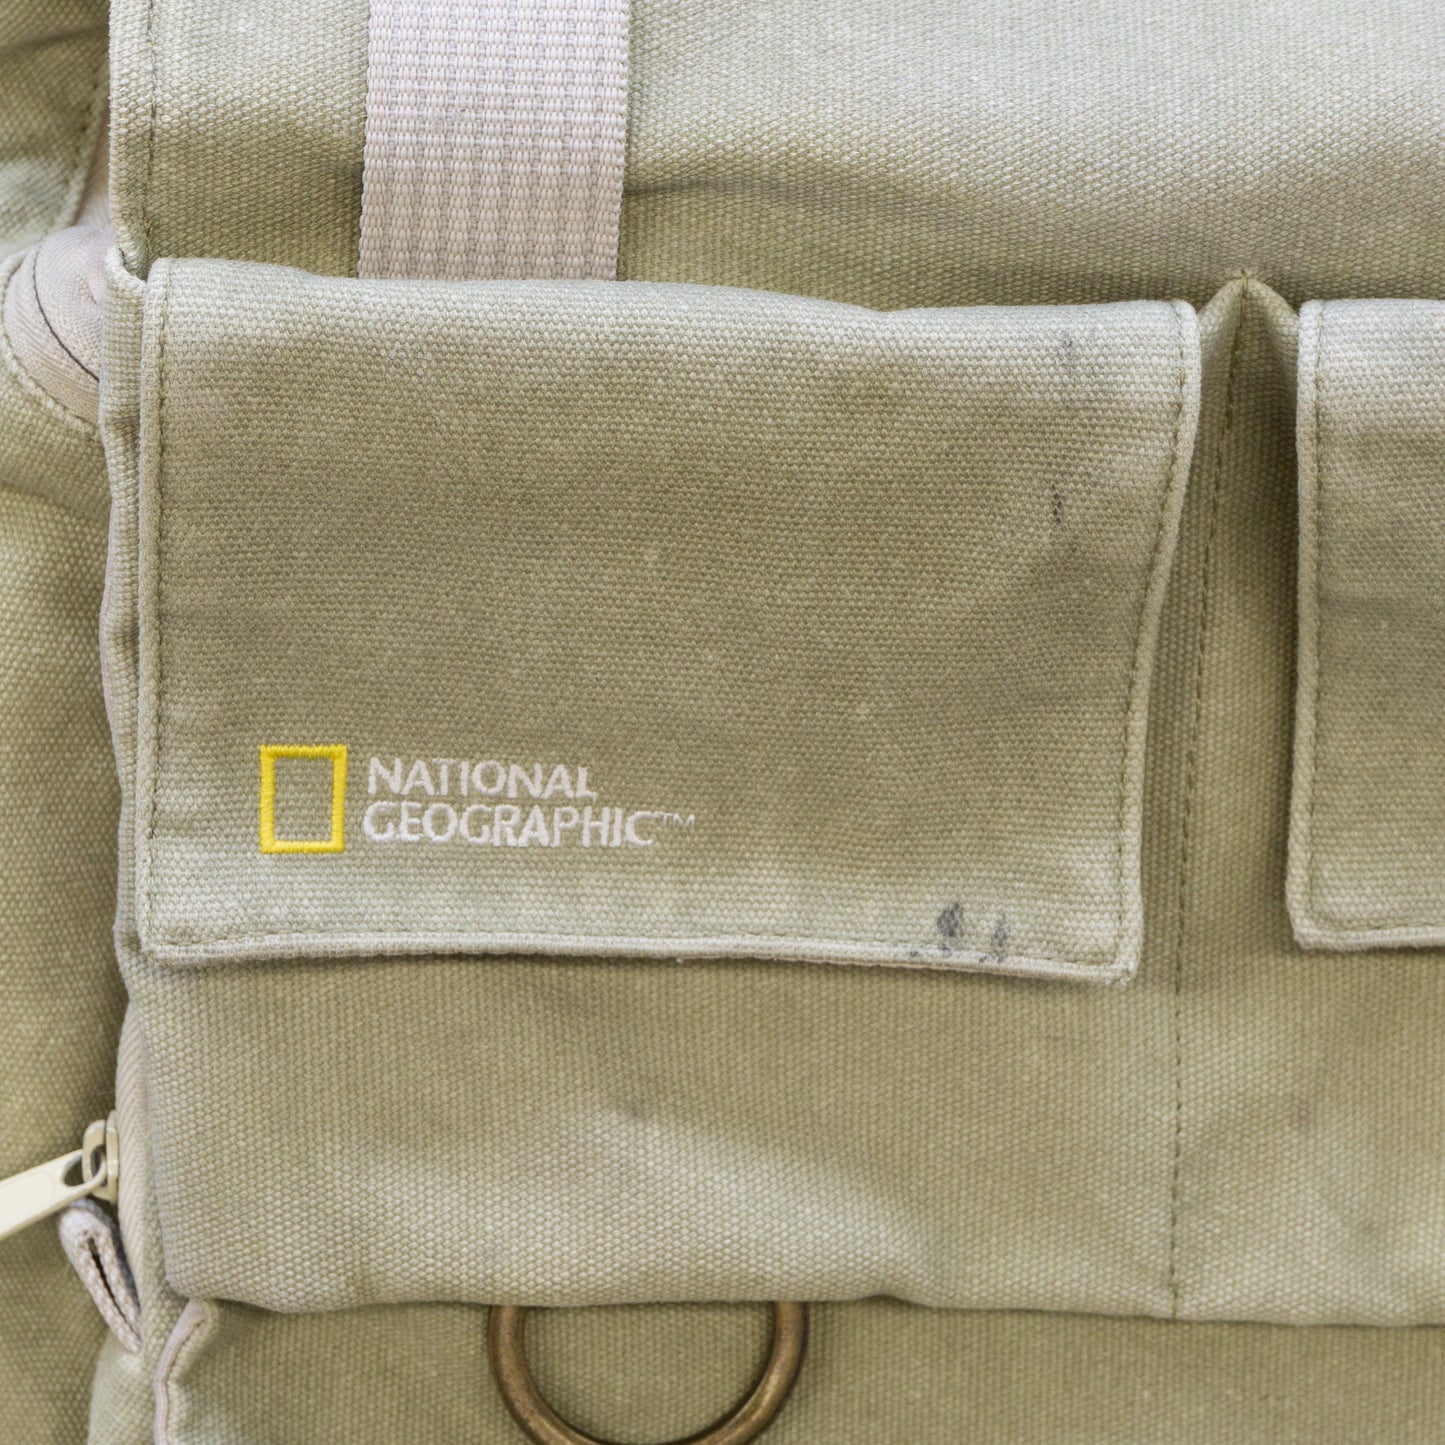 National Geographic Canvas Camera Bag